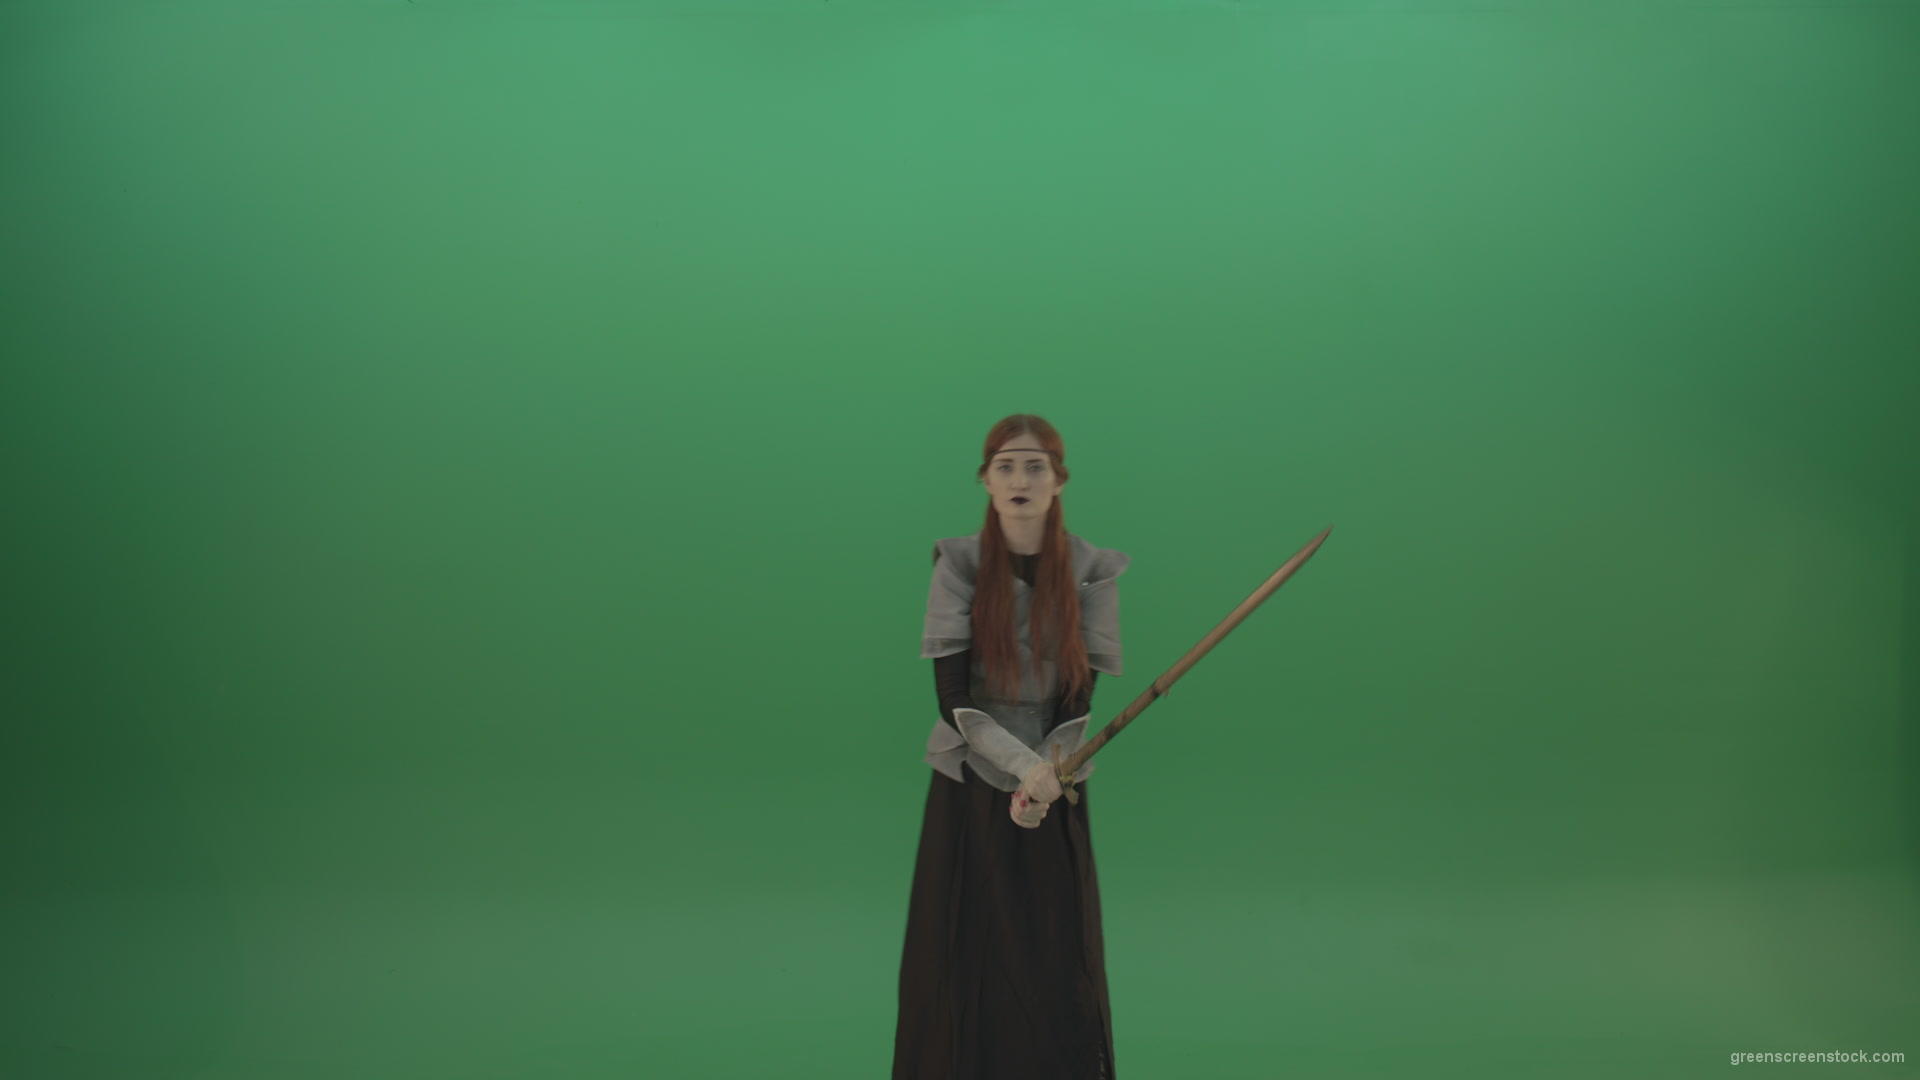 Swinging-on-a-green-background-with-a-sword-the-girl-gracefully-shows-her-strength_007 Green Screen Stock